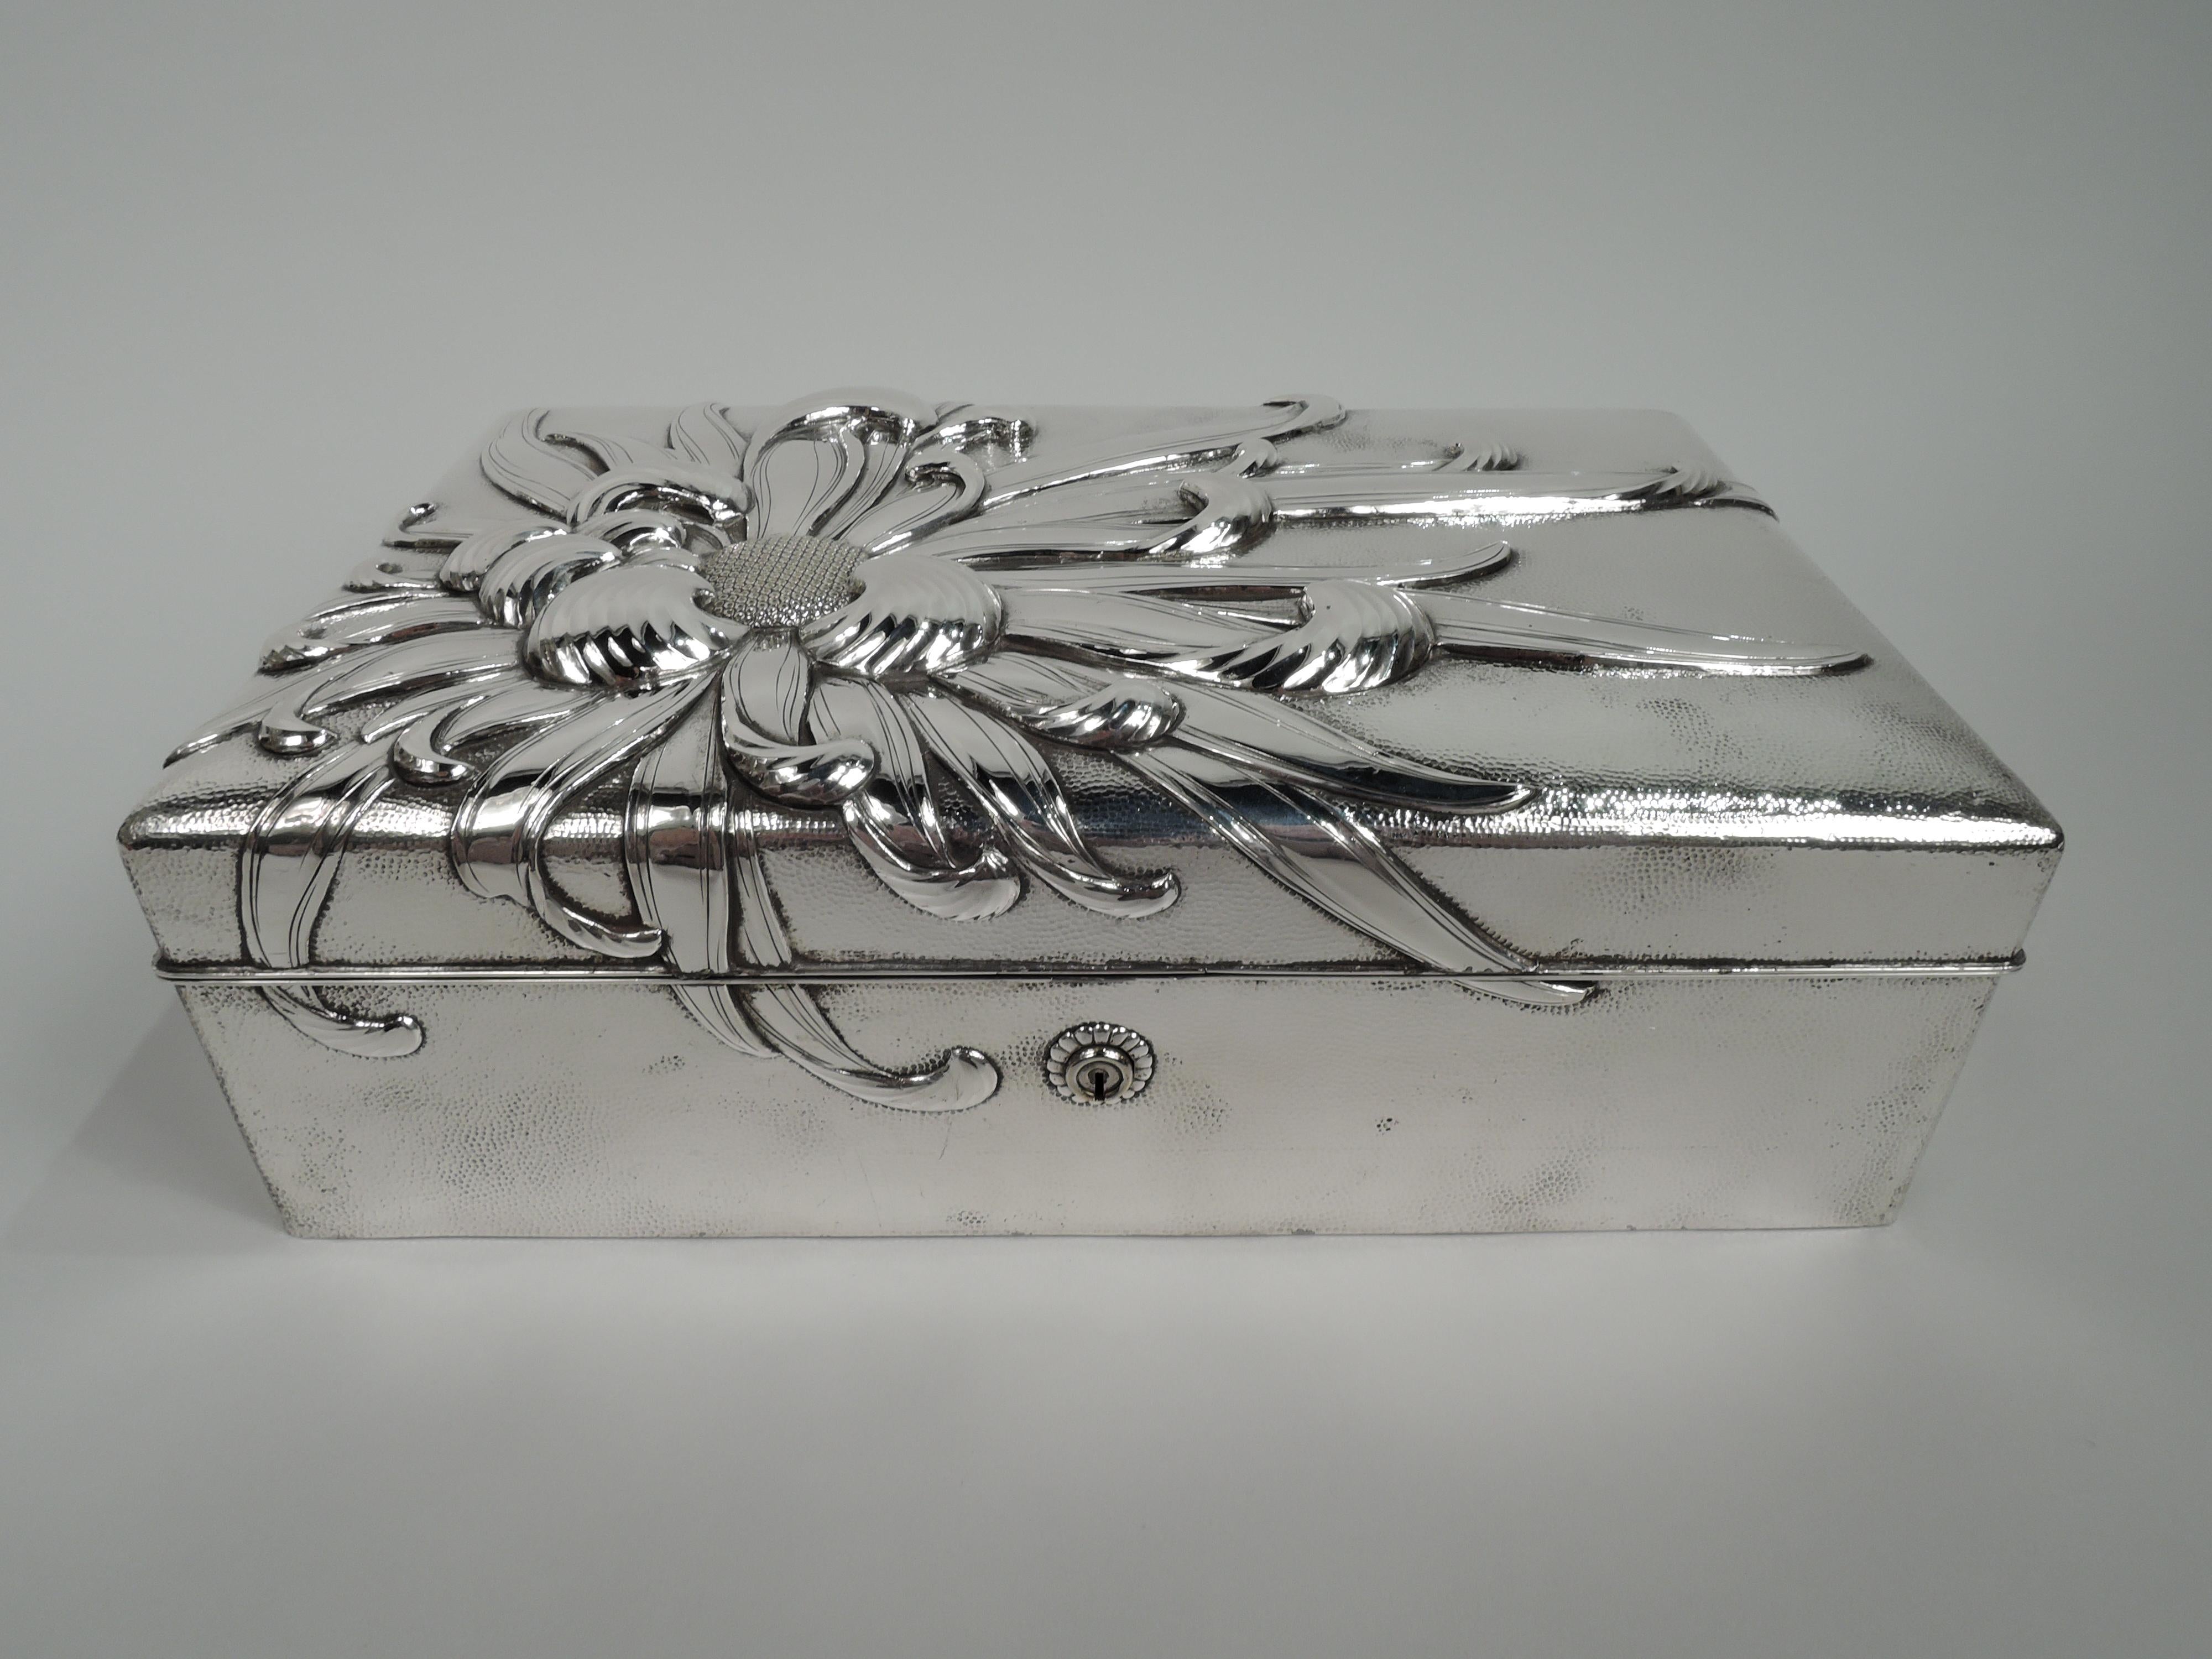 Bold and striking Japanese silver box, ca 1910. Rectangular with straight sides and hinged cover. Allover spot hammering. On cover top is applied chrysanthemum with entwined and waving tentacular petals that drape over the sides. Petal-bordered